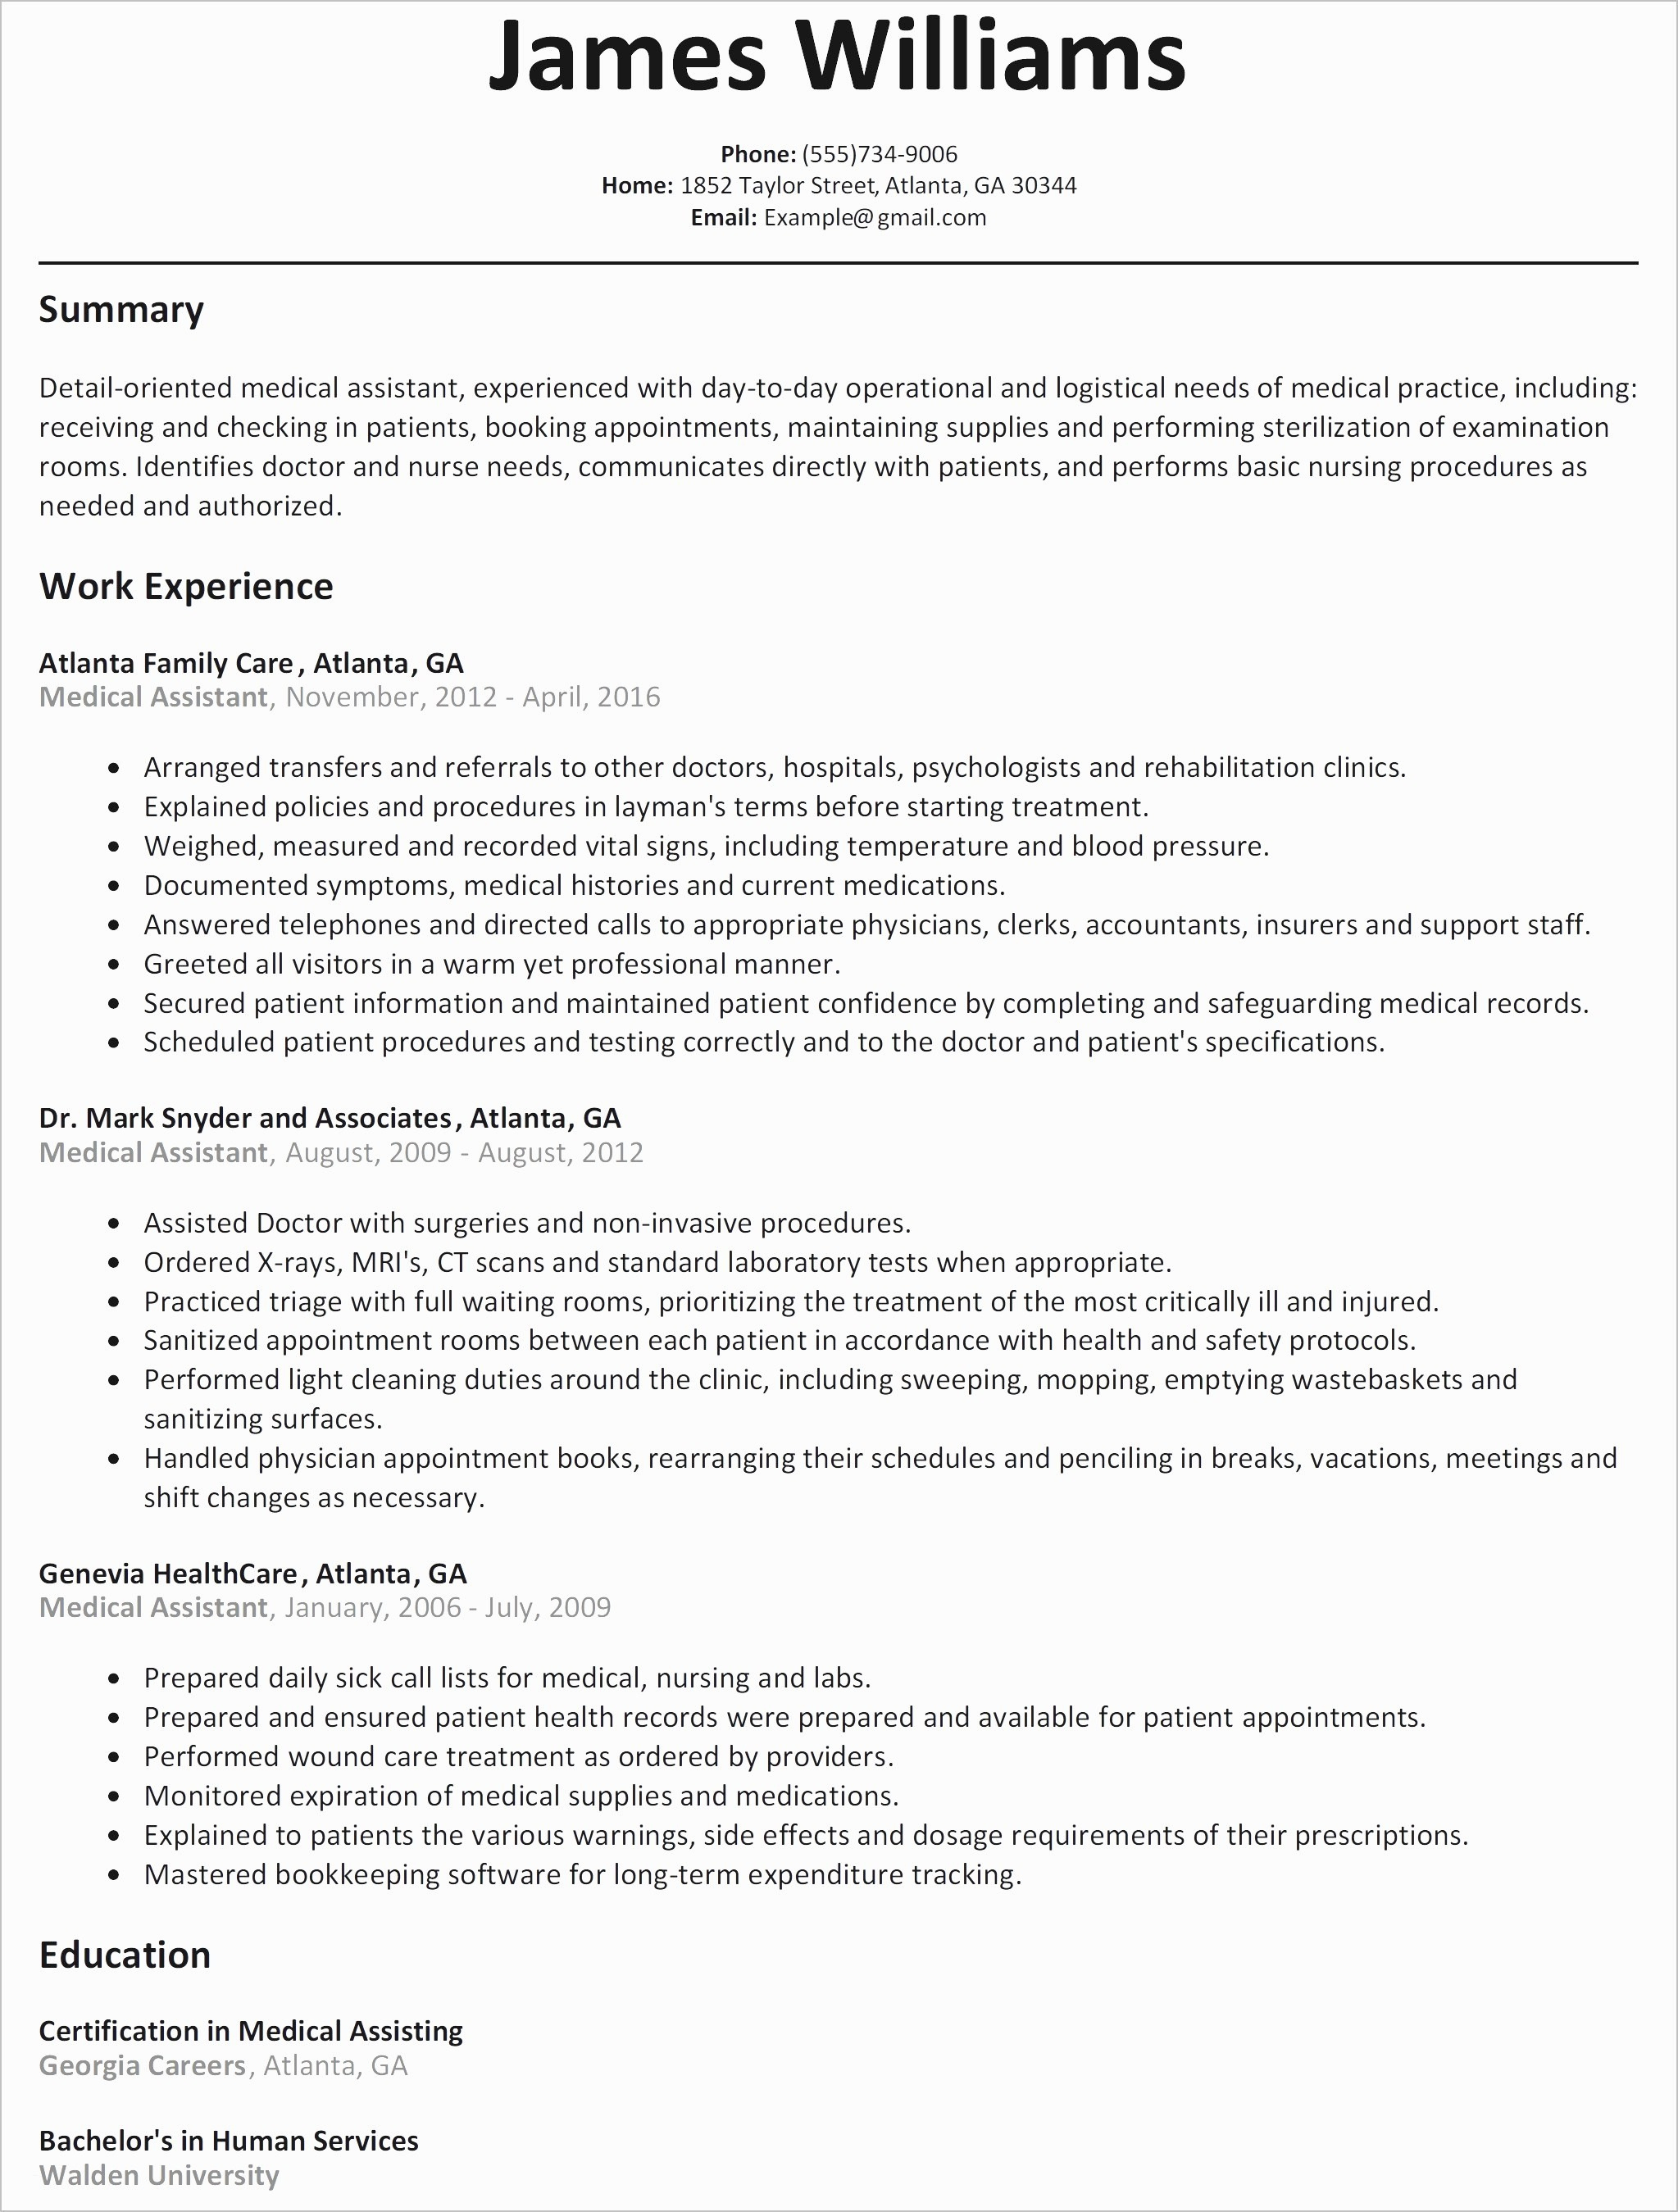 Basic Resume Examples  Resume Examples For Job Beautiful Resume Cover Letter Example